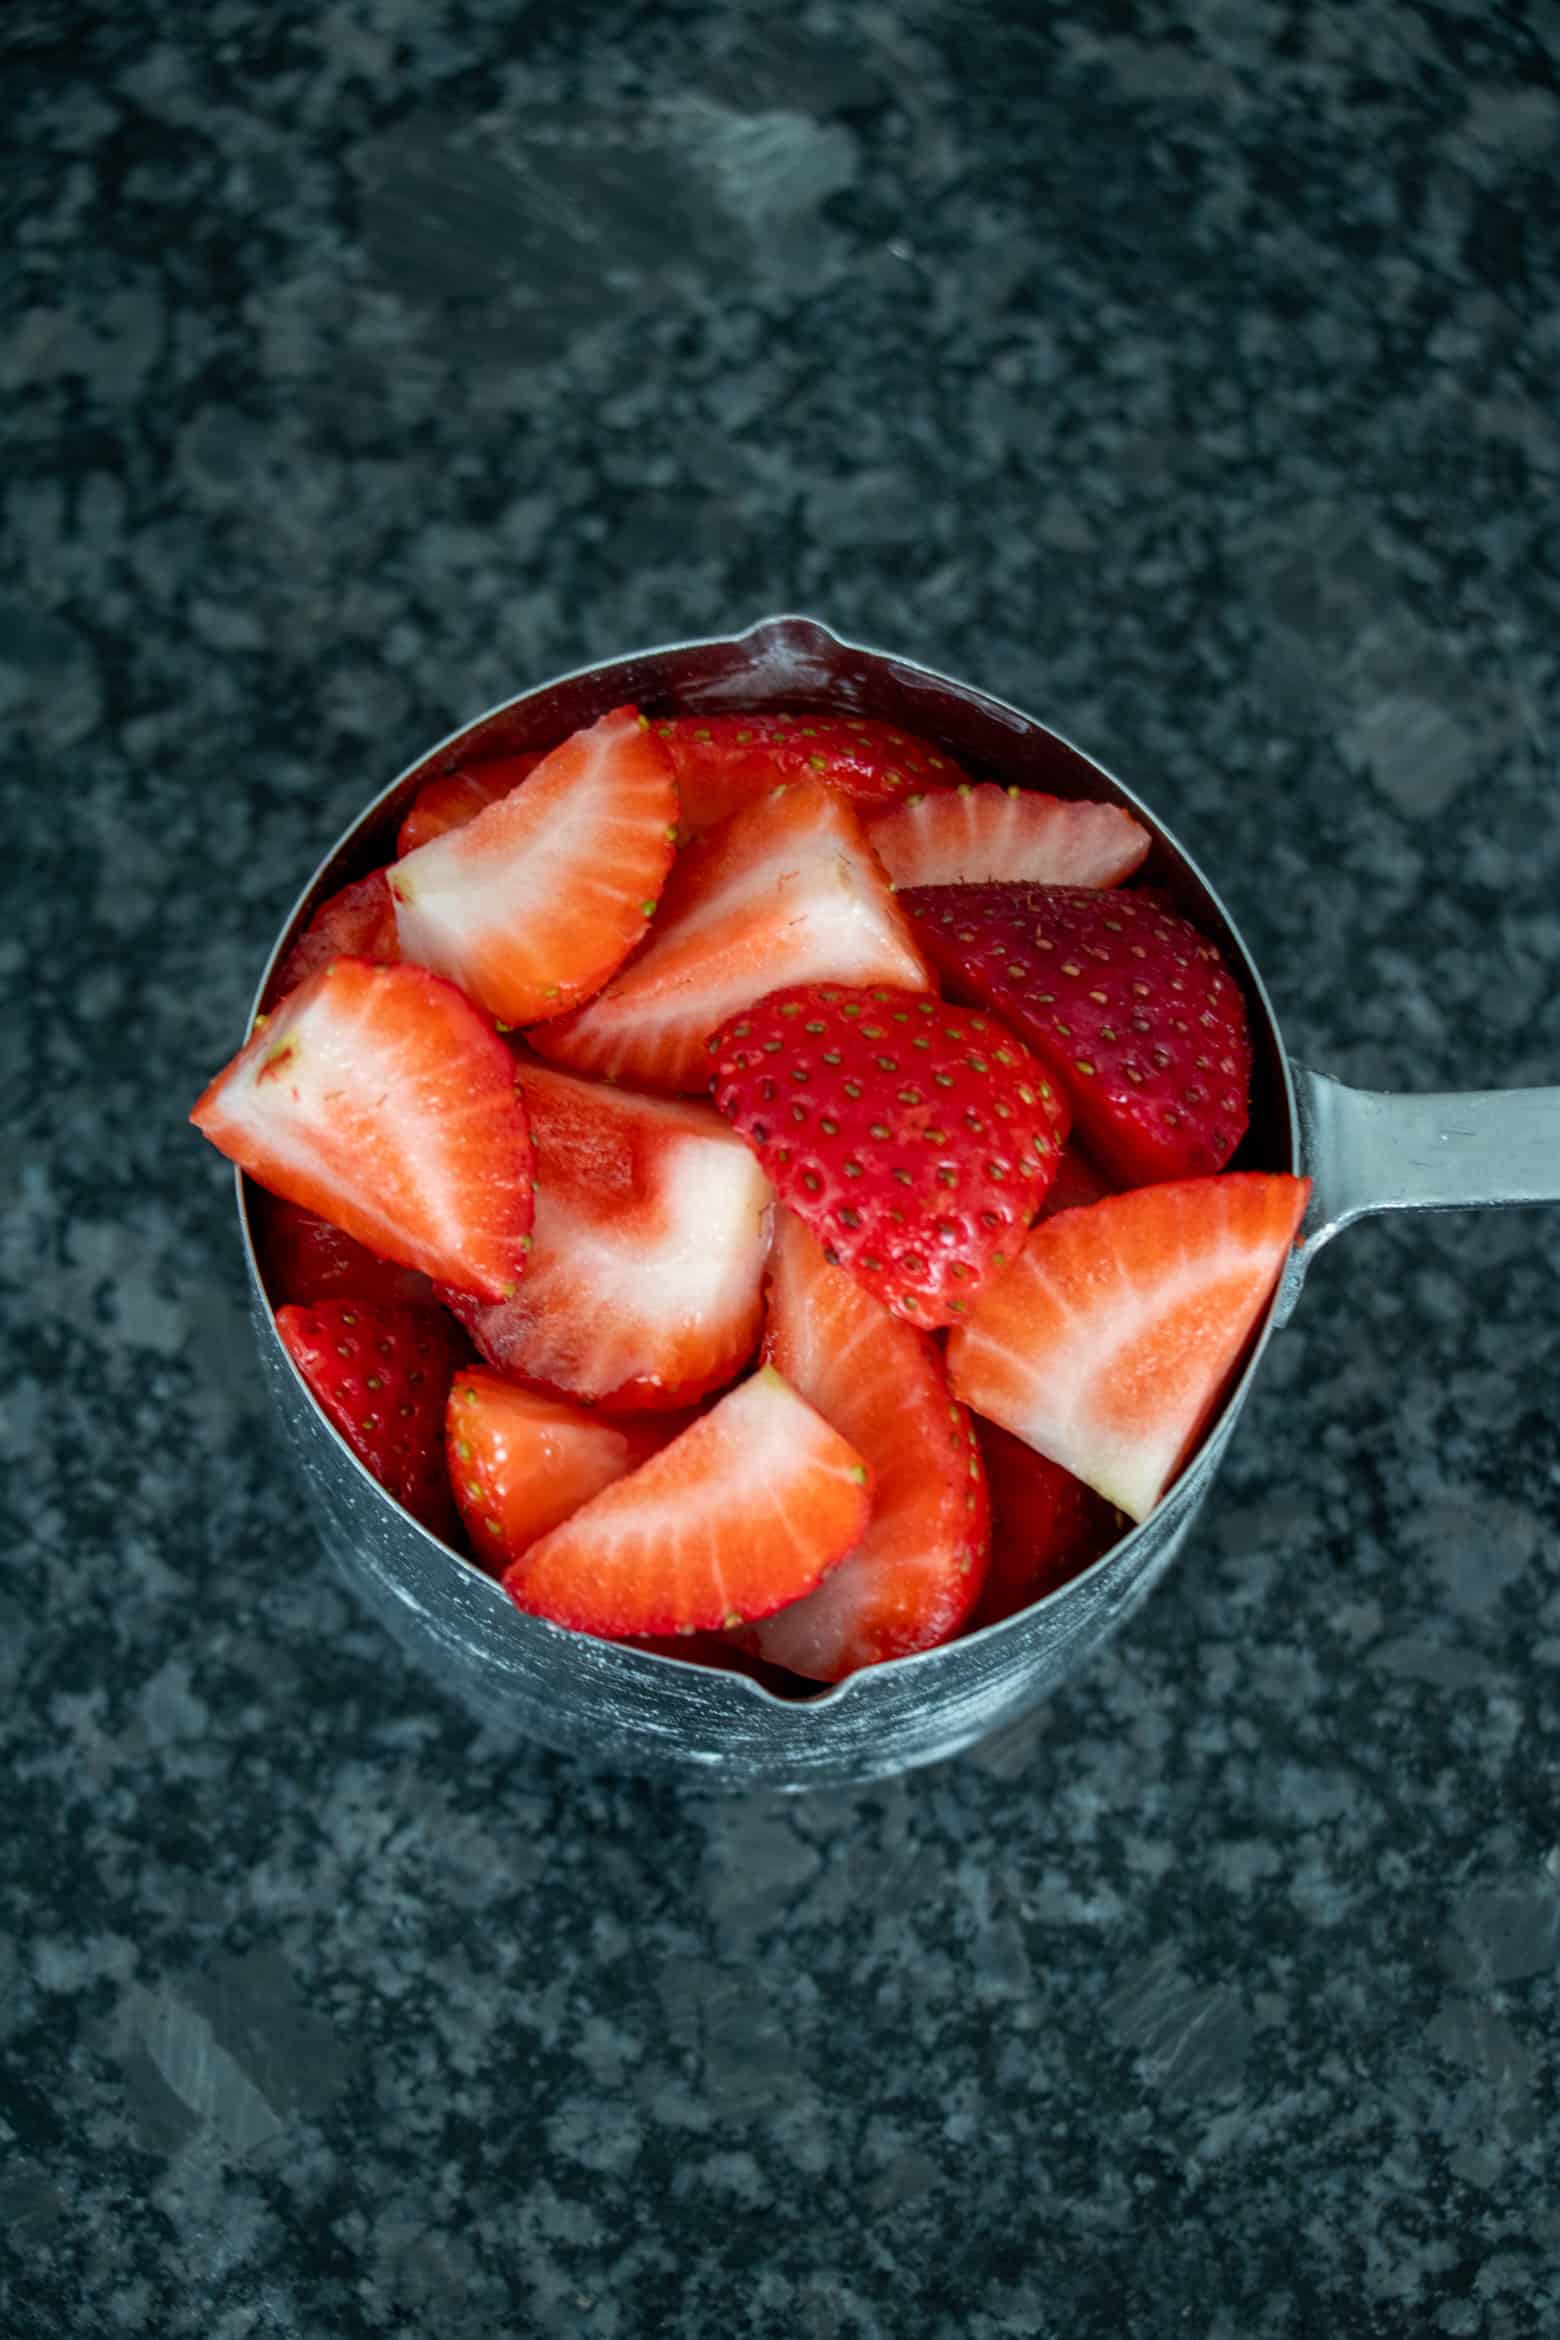 Strawberries packed in a measuring cup